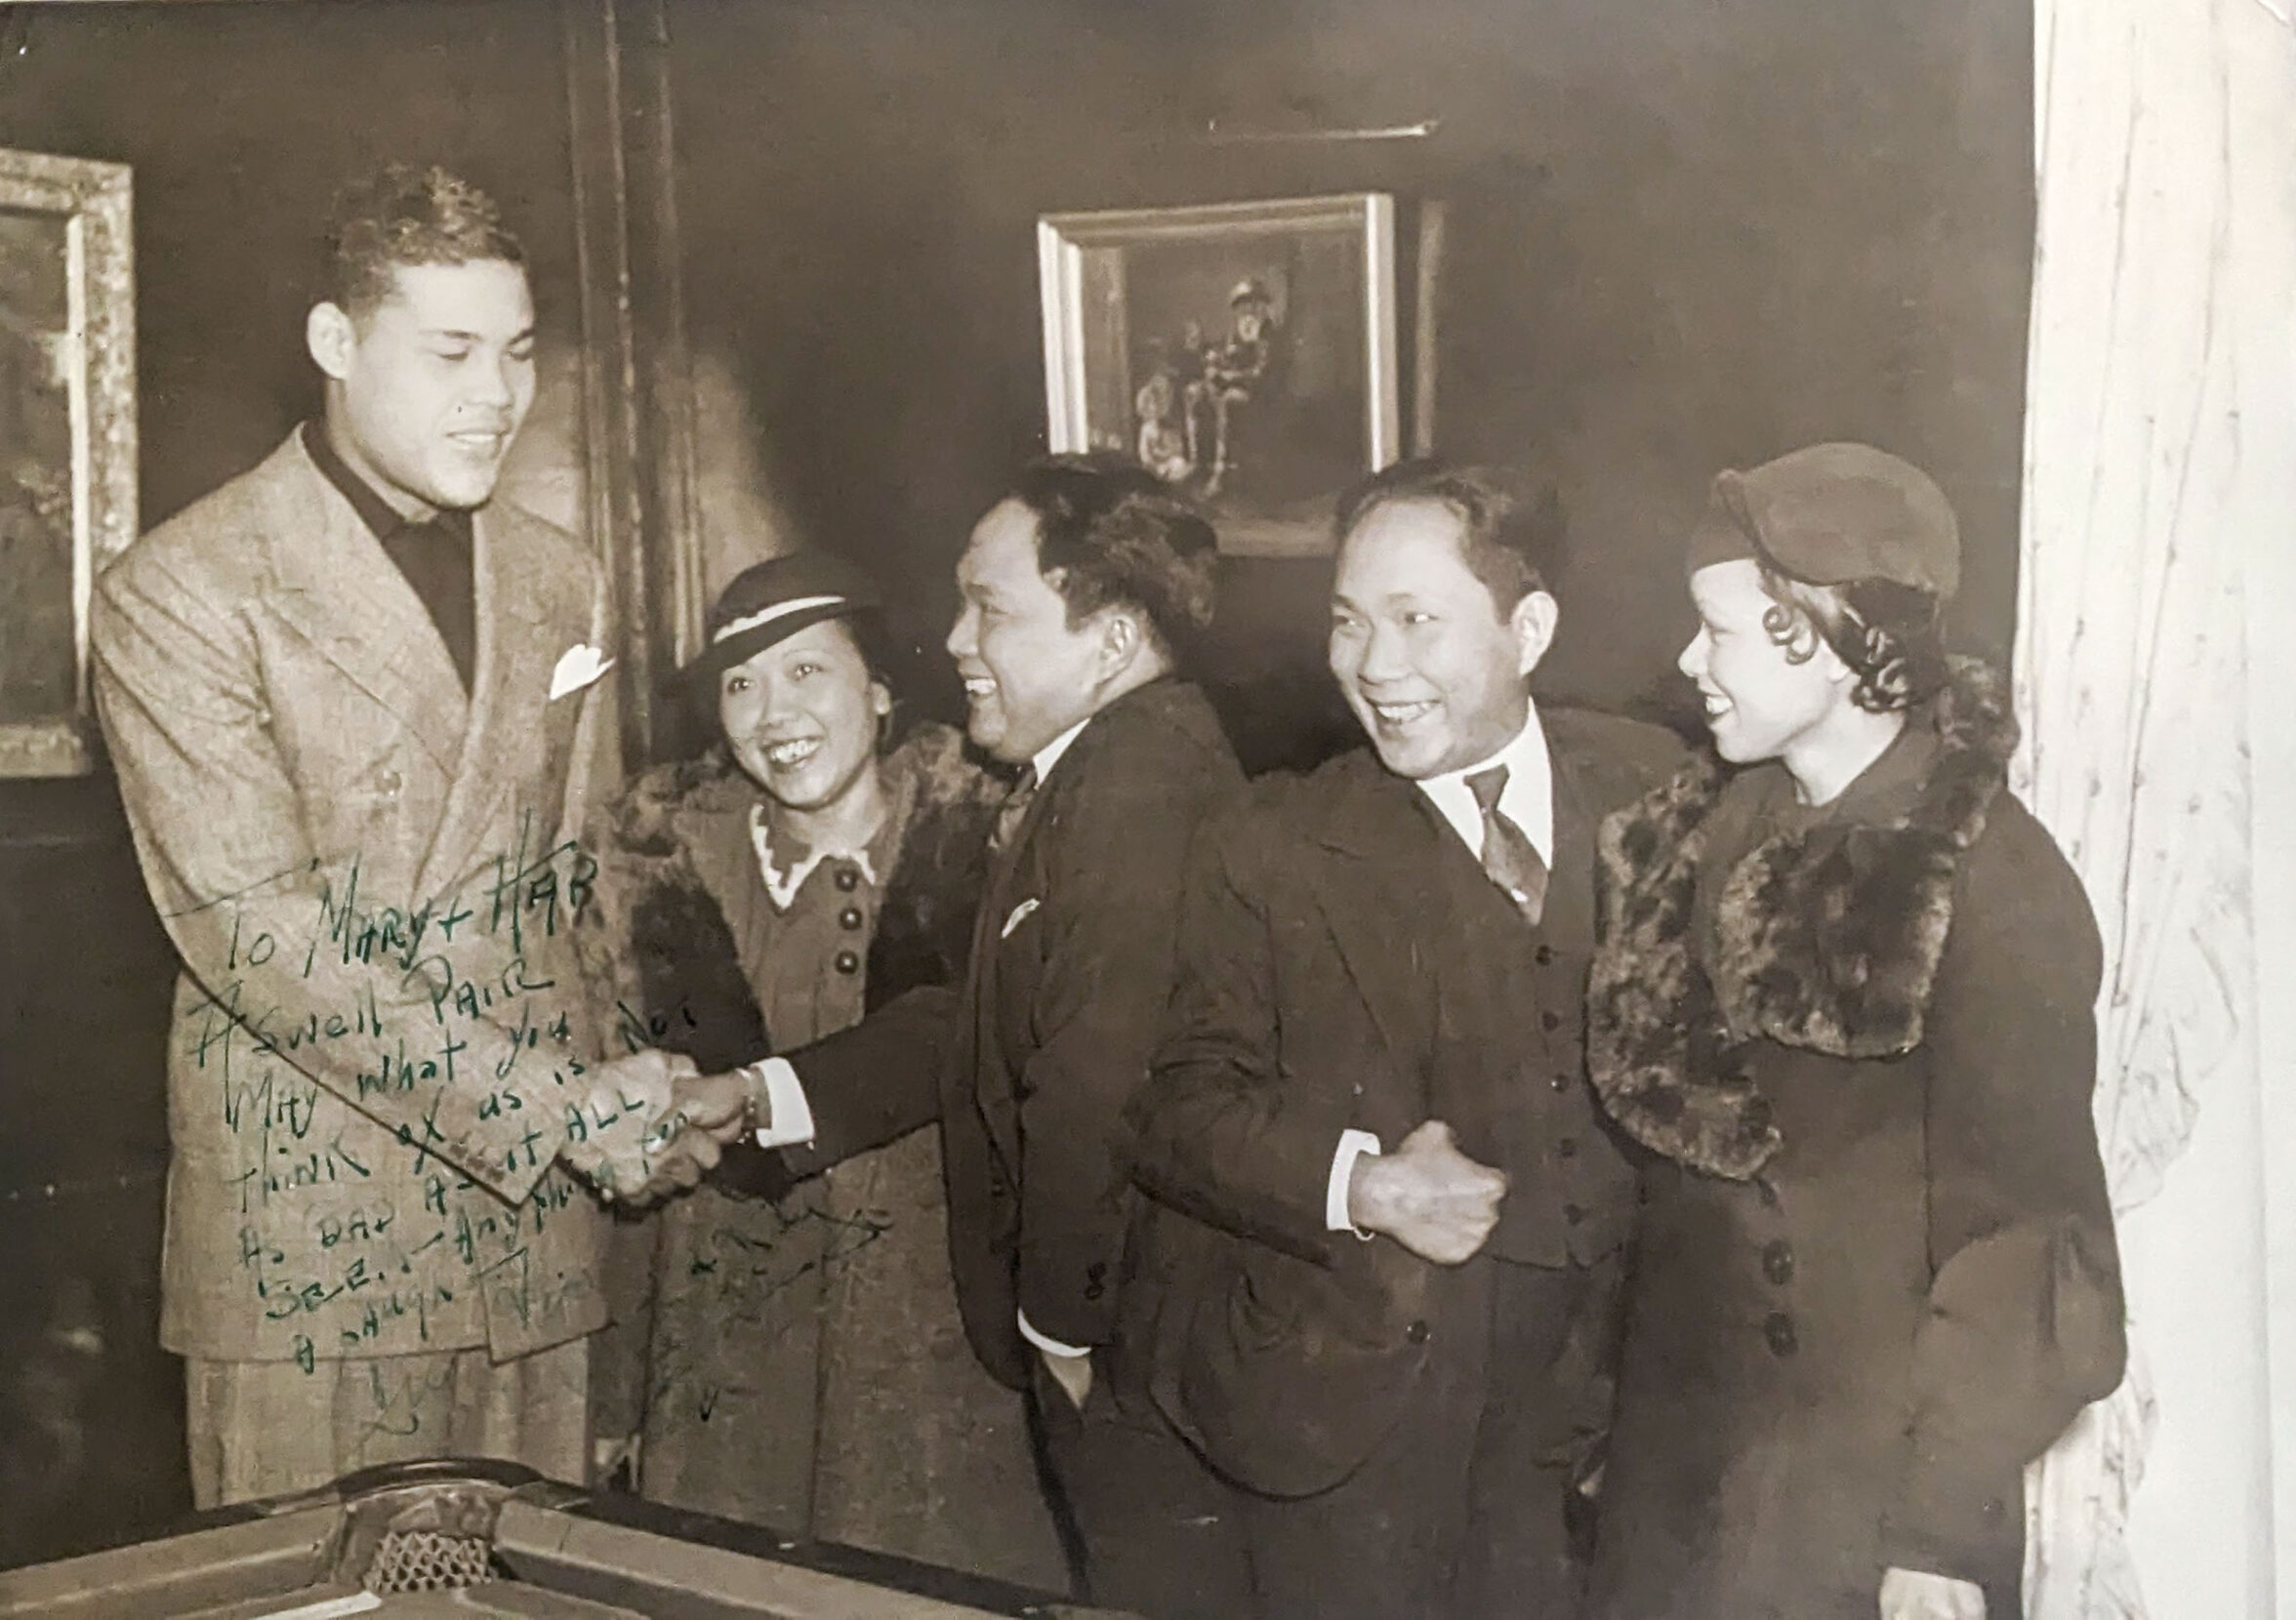 A signed black and white photograph of conjoined twins with their wives beside them, shaking hands with a tall Black man.